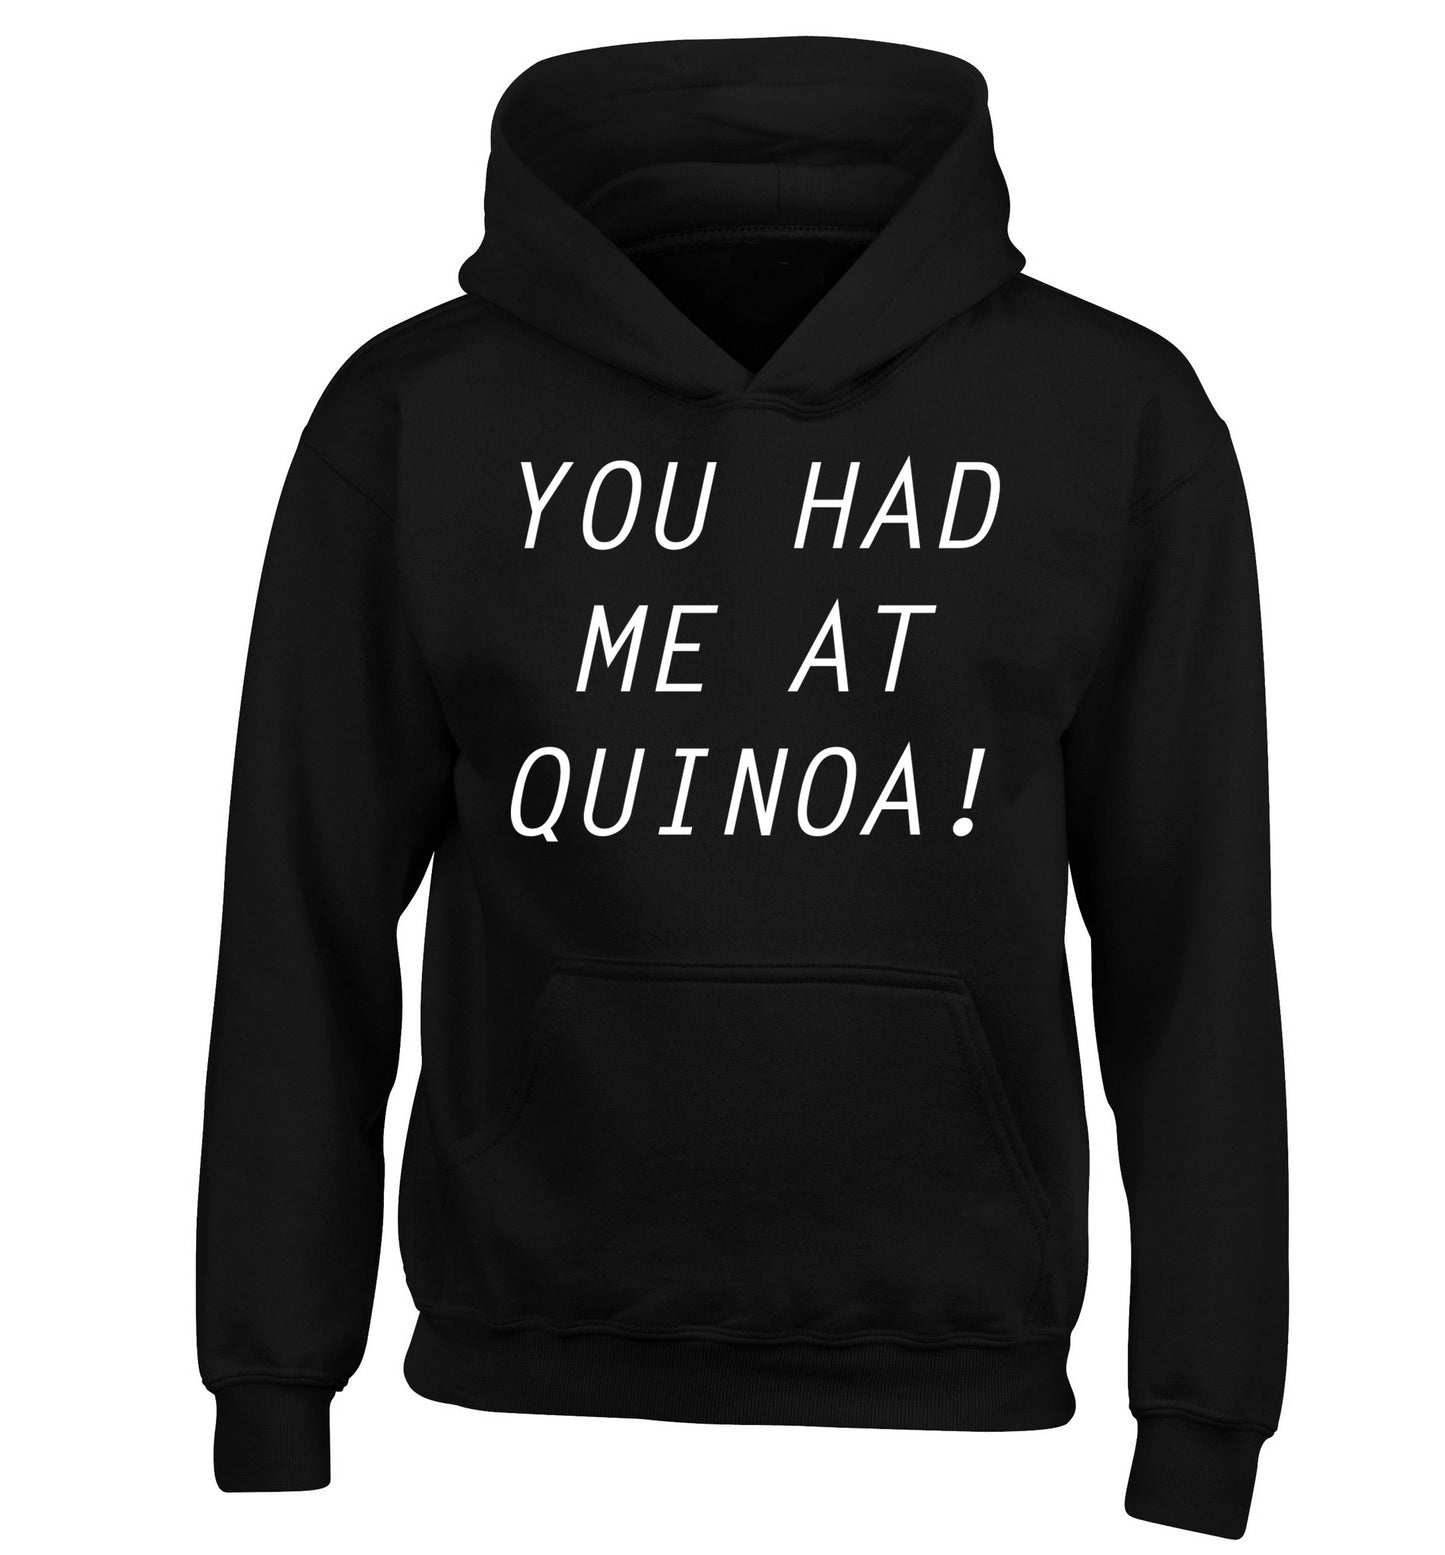 You had me at quinoa children's black hoodie 12-14 Years